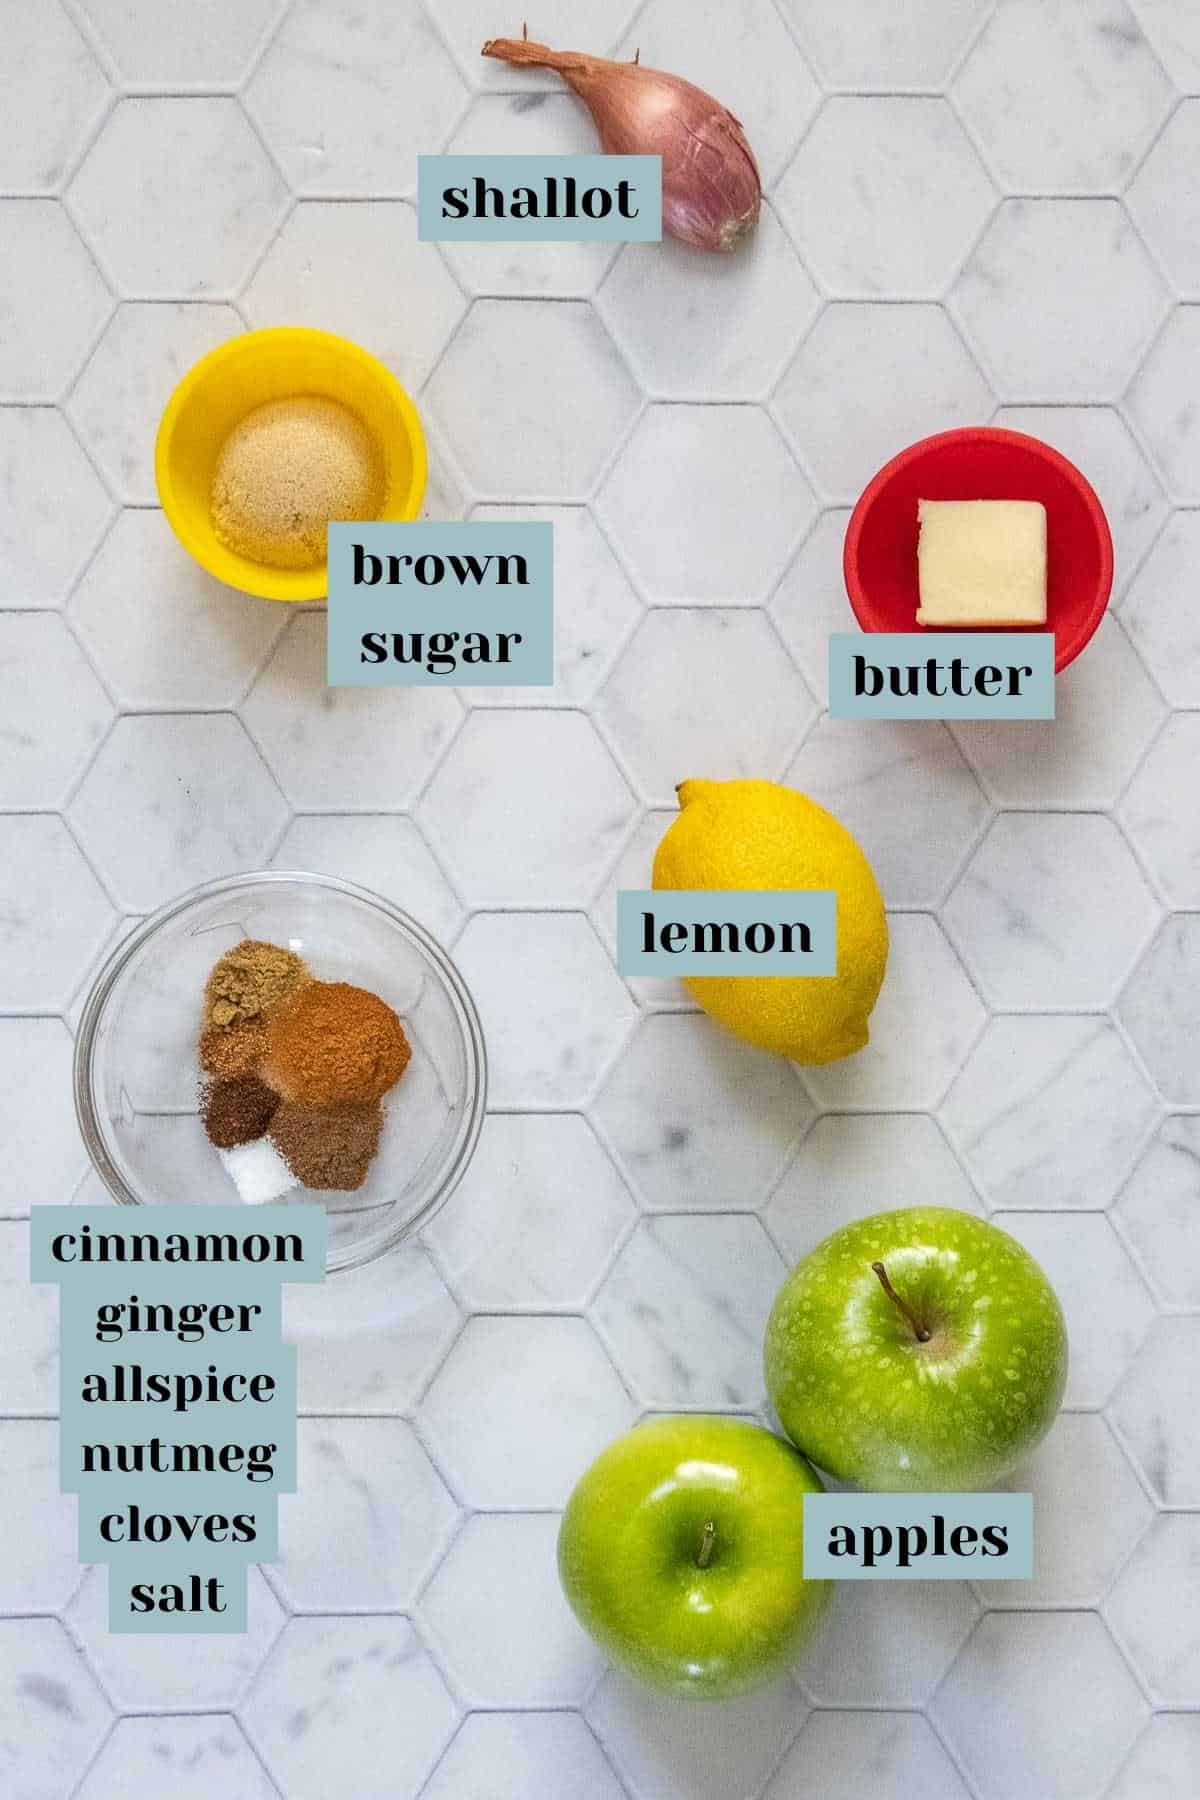 Ingredients for apple compote on a tile surface with labels.